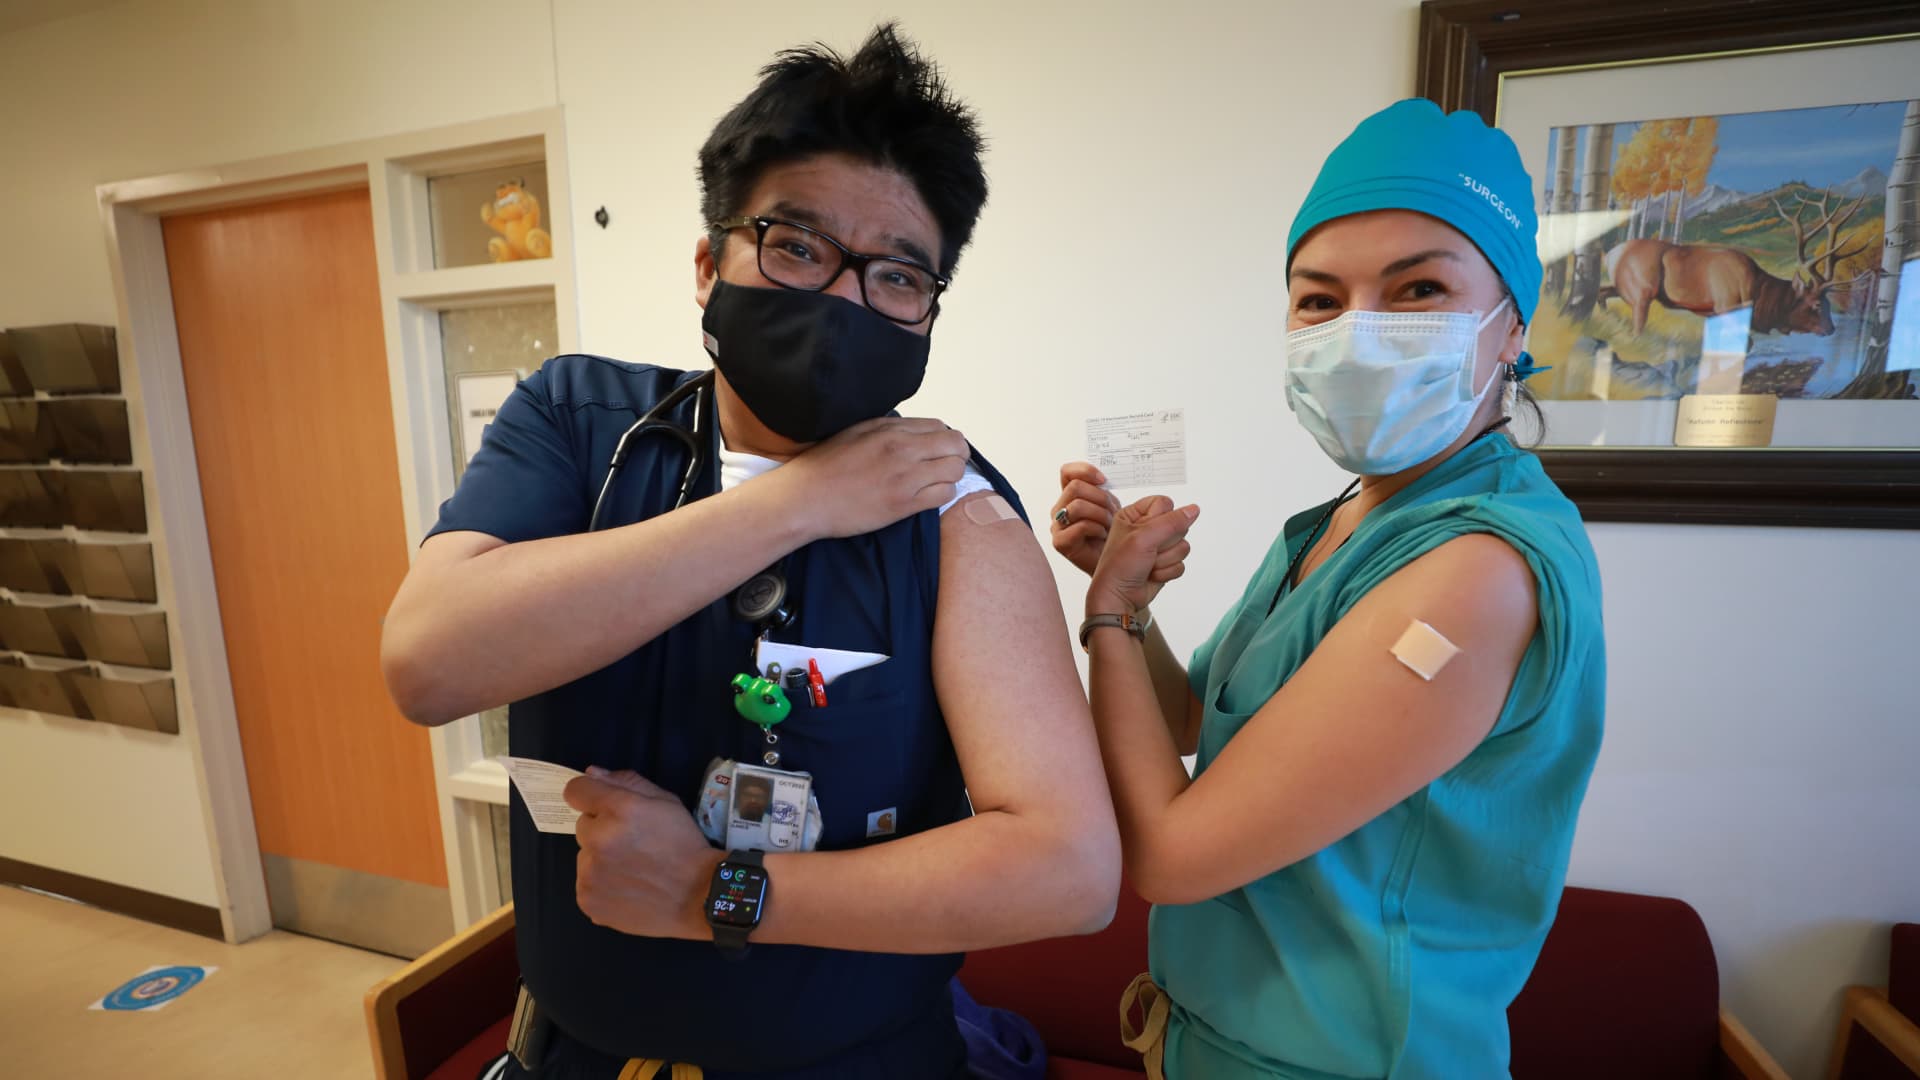 Lance Whitehair (L), a Navajo doctor, and Bijiibaa' Kristin Garrison, a Navajo surgeon, pose for photos after receiving their COVID-19 vaccines at Northern Navajo Medical Center on December 15, 2020 in Shiprock, New Mexico.